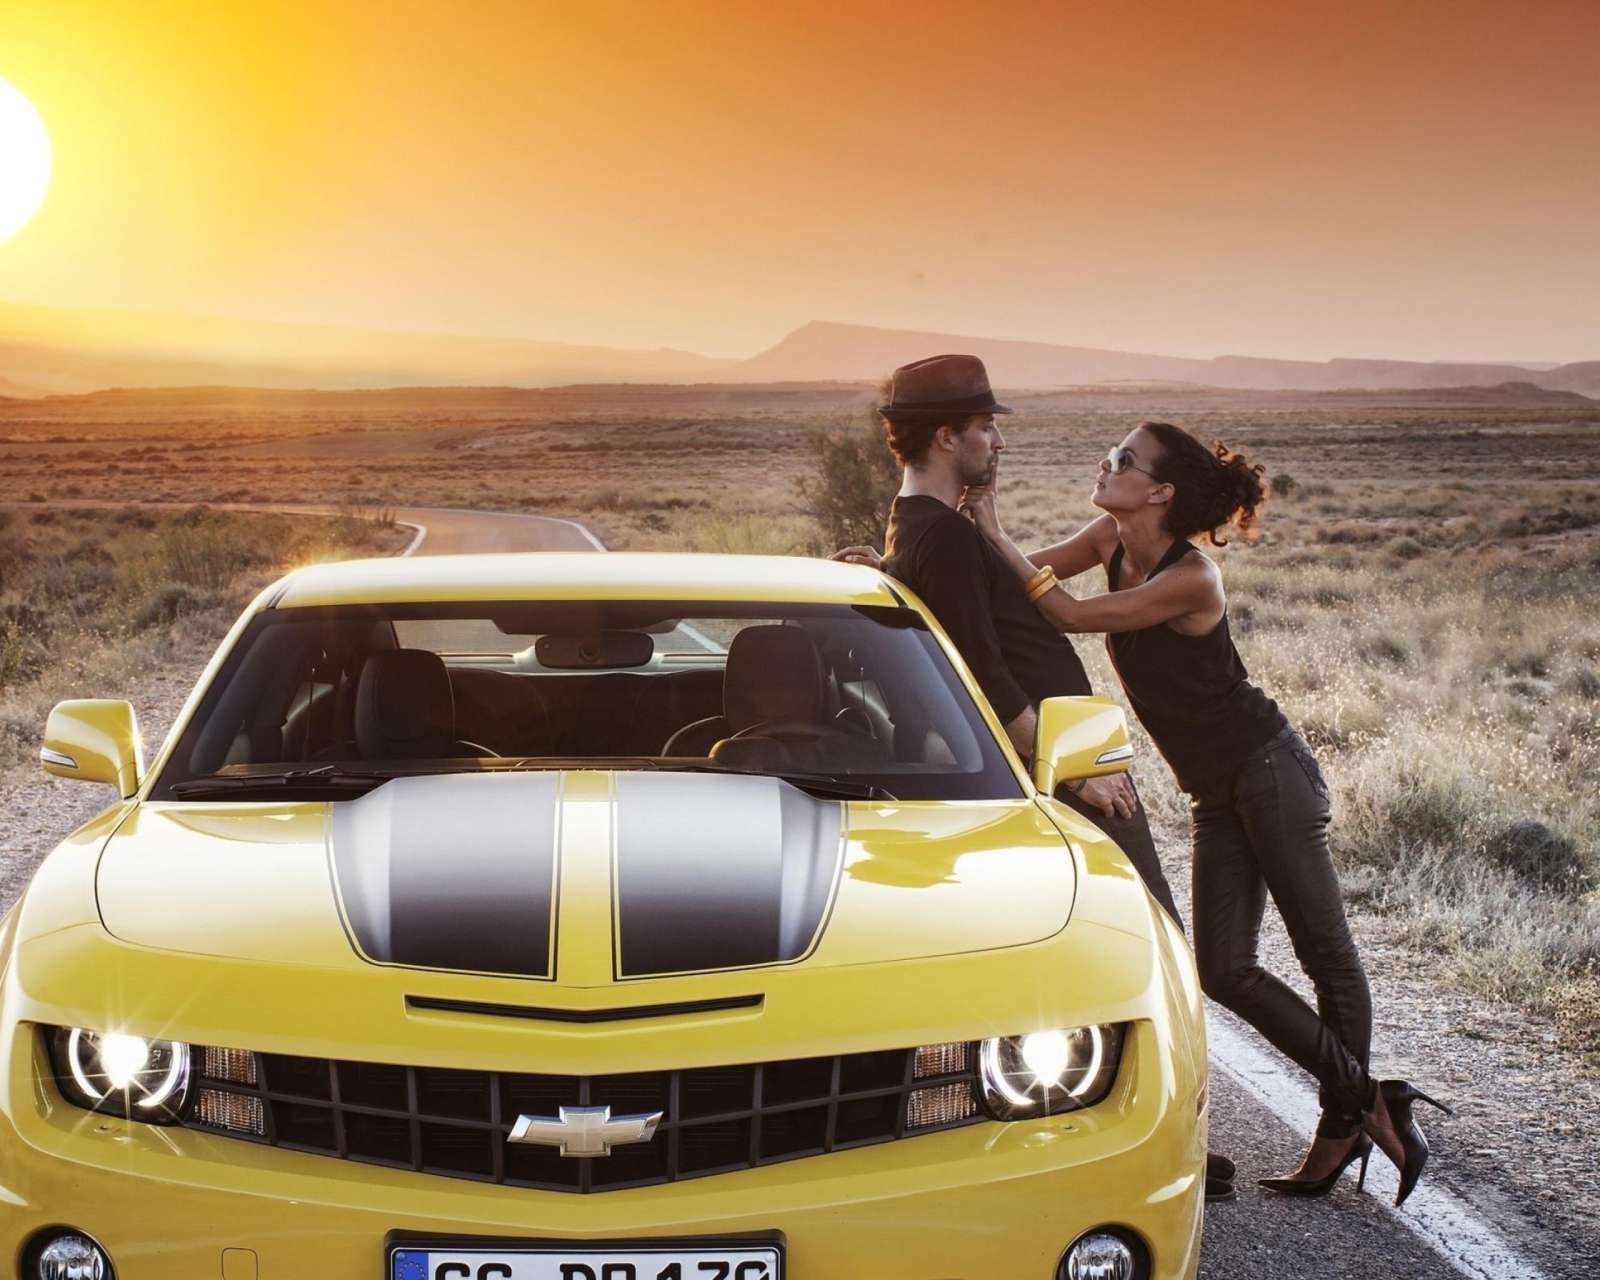 Couple And Yellow Chevrolet wallpaper 1600x1280